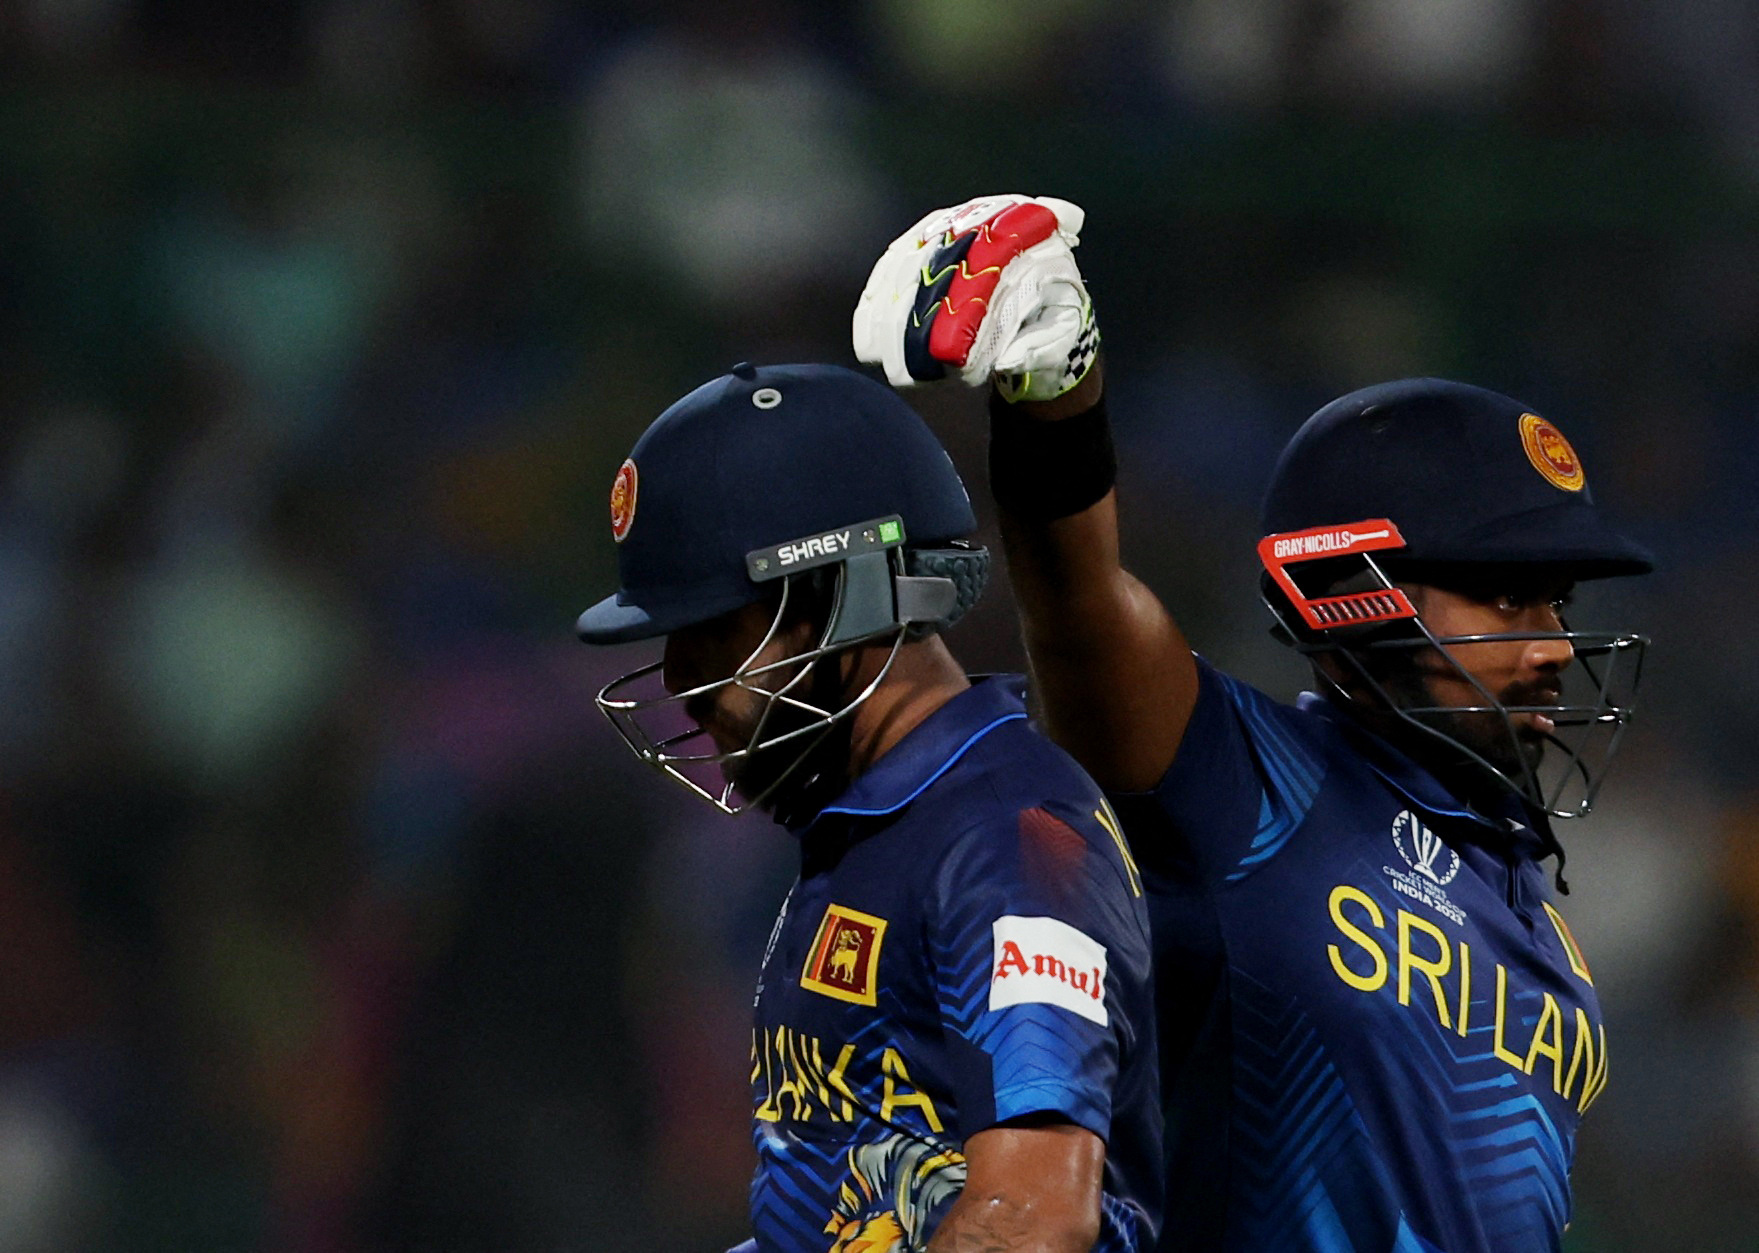 Photos - Sri Lanka Cricket Reveal Jersey for T20 World Cup 2022